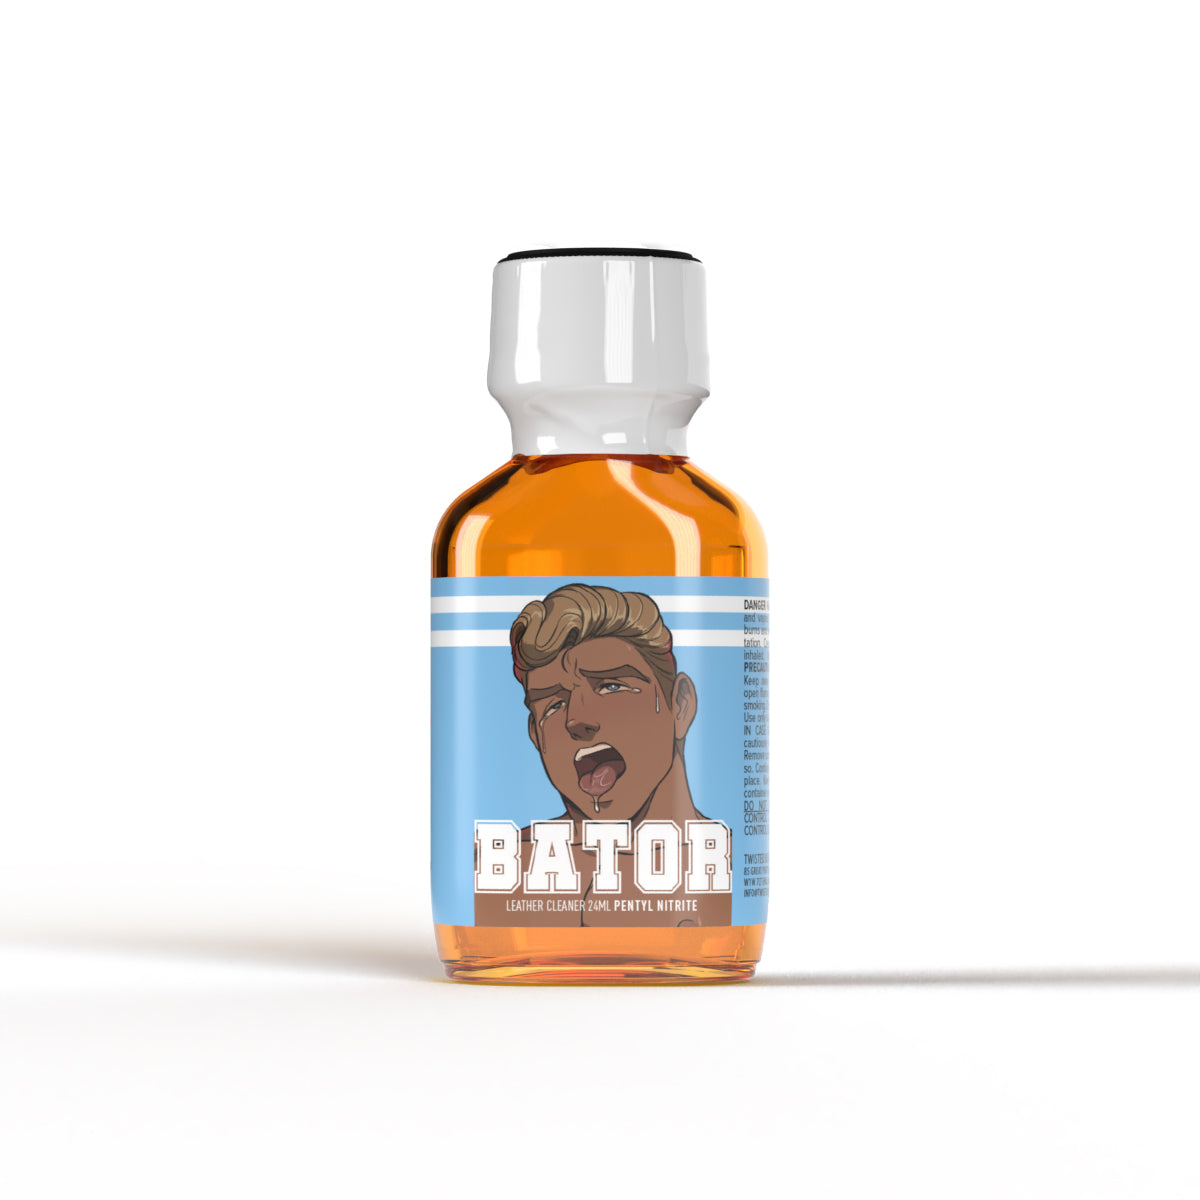 A bottle of Bator Poppers by Twisted Beast.